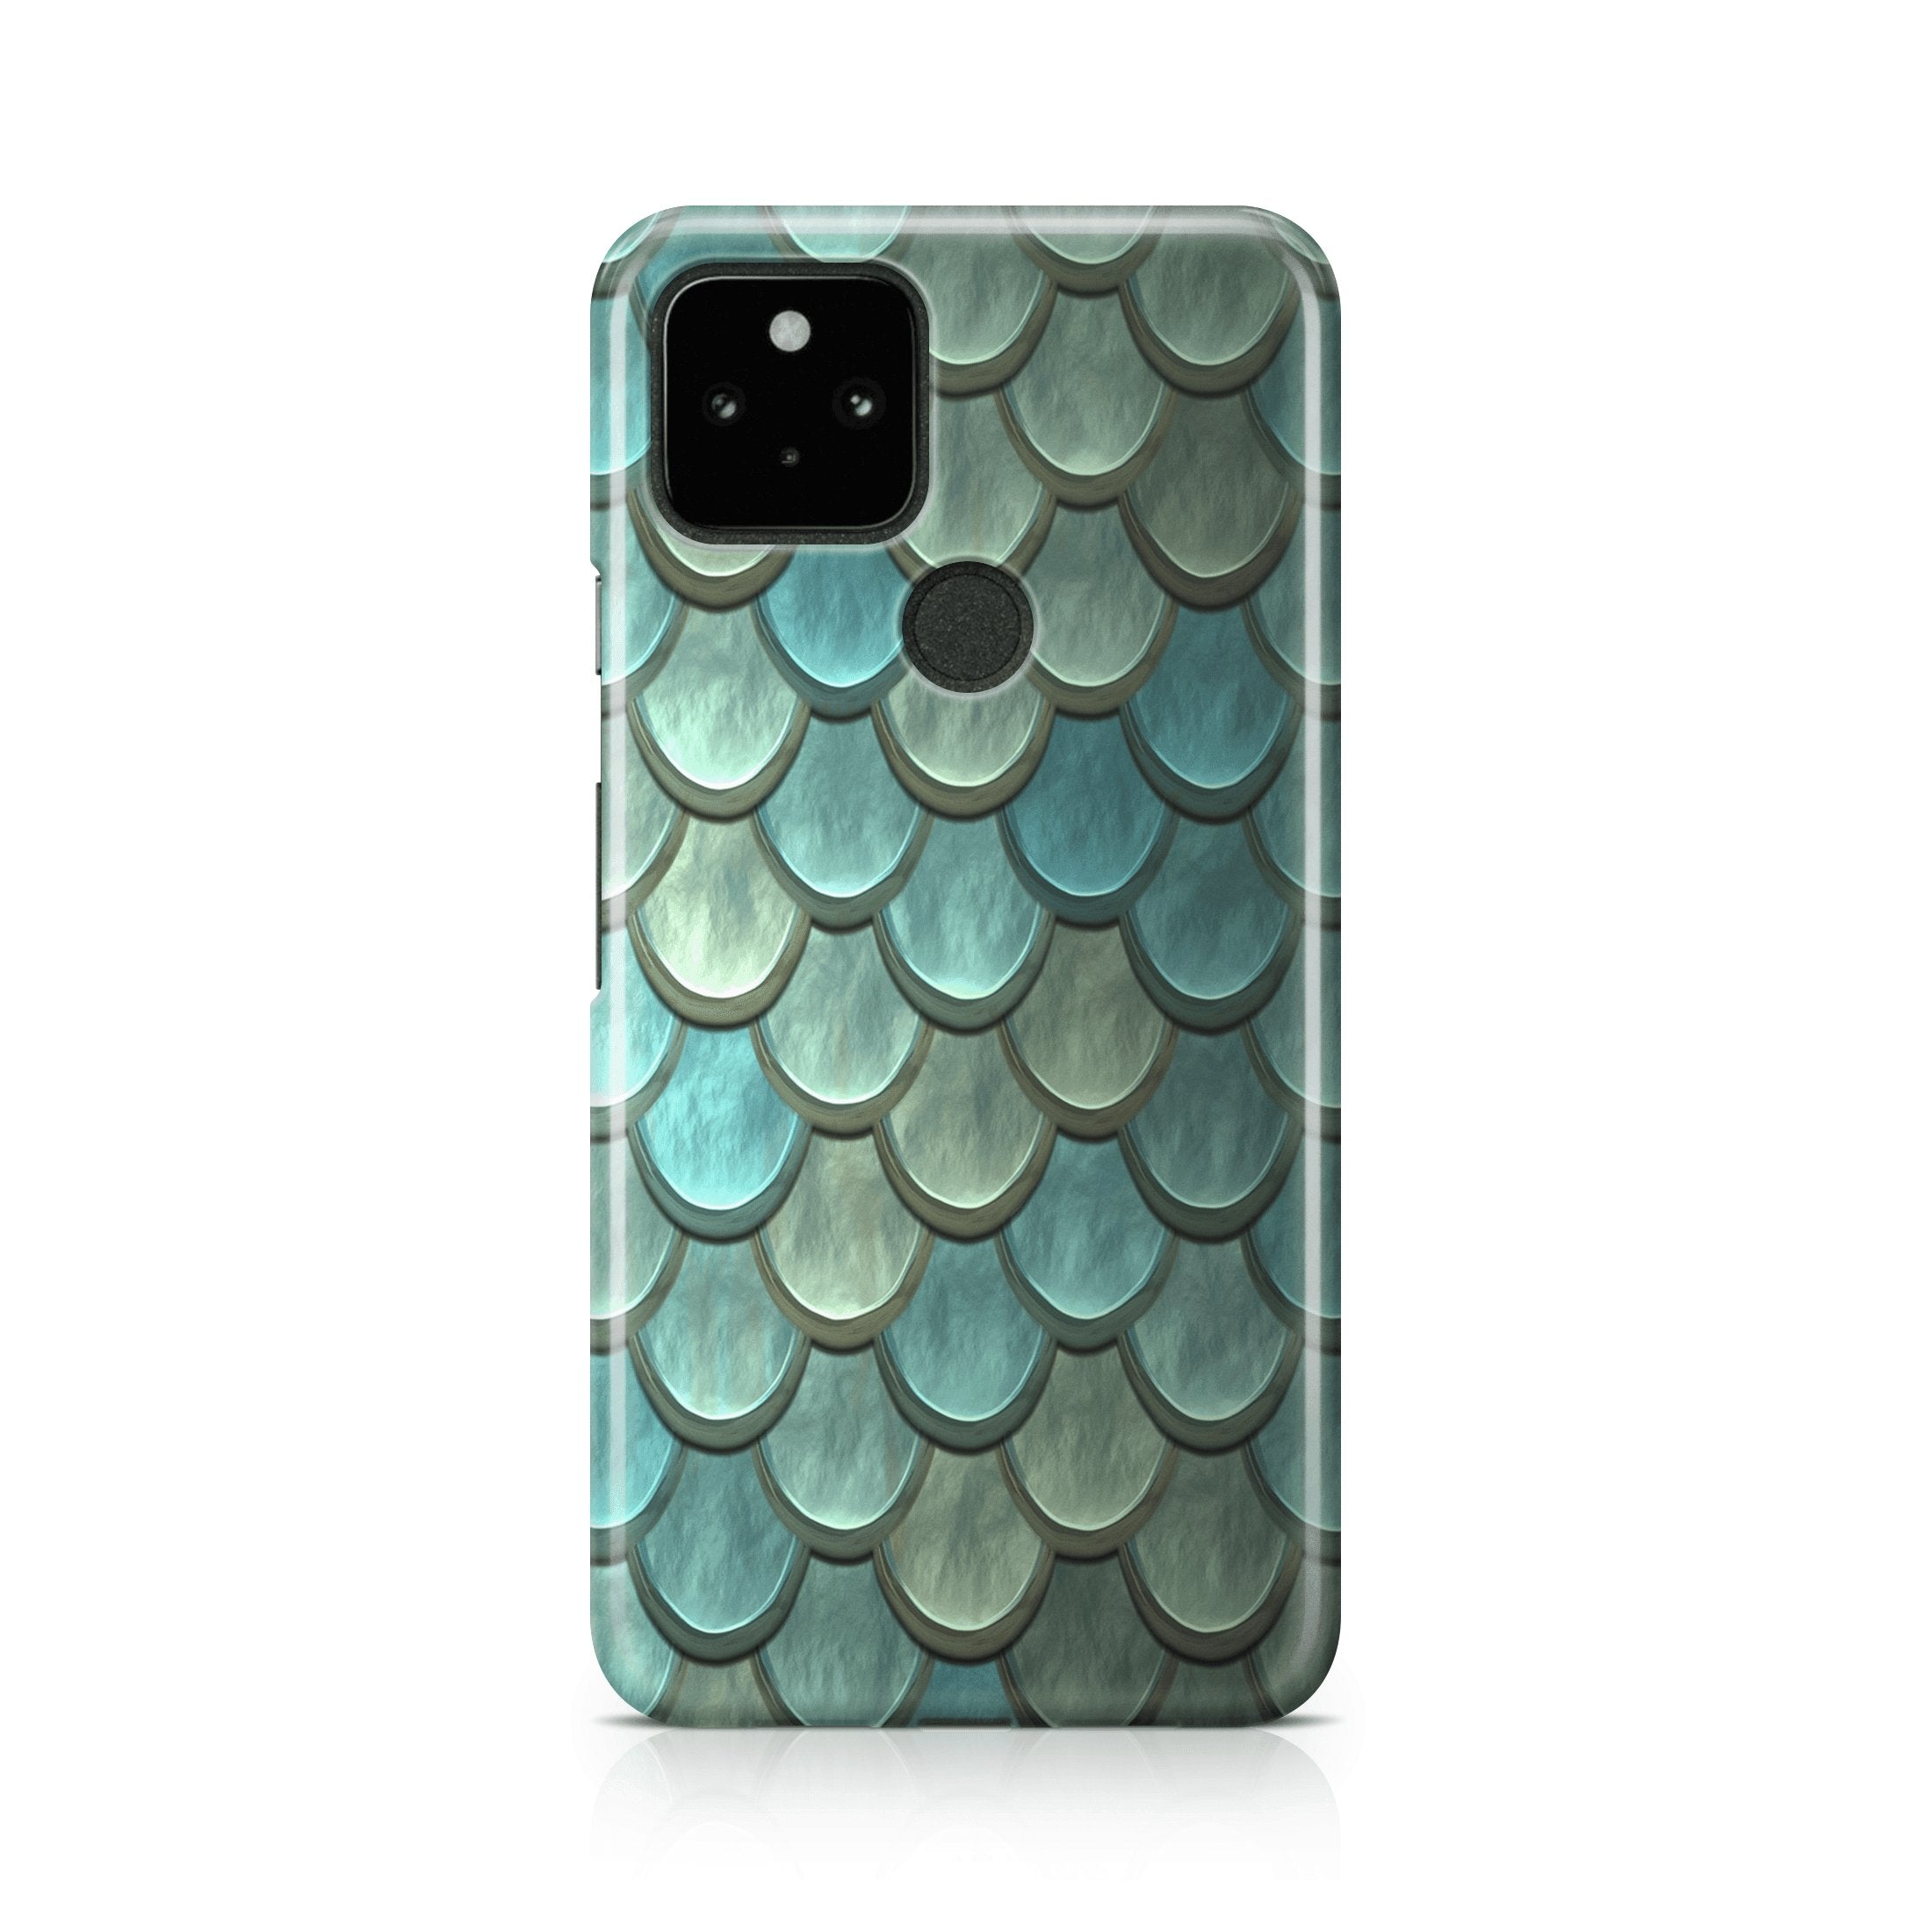 Green Mermaid Scale - Google phone case designs by CaseSwagger